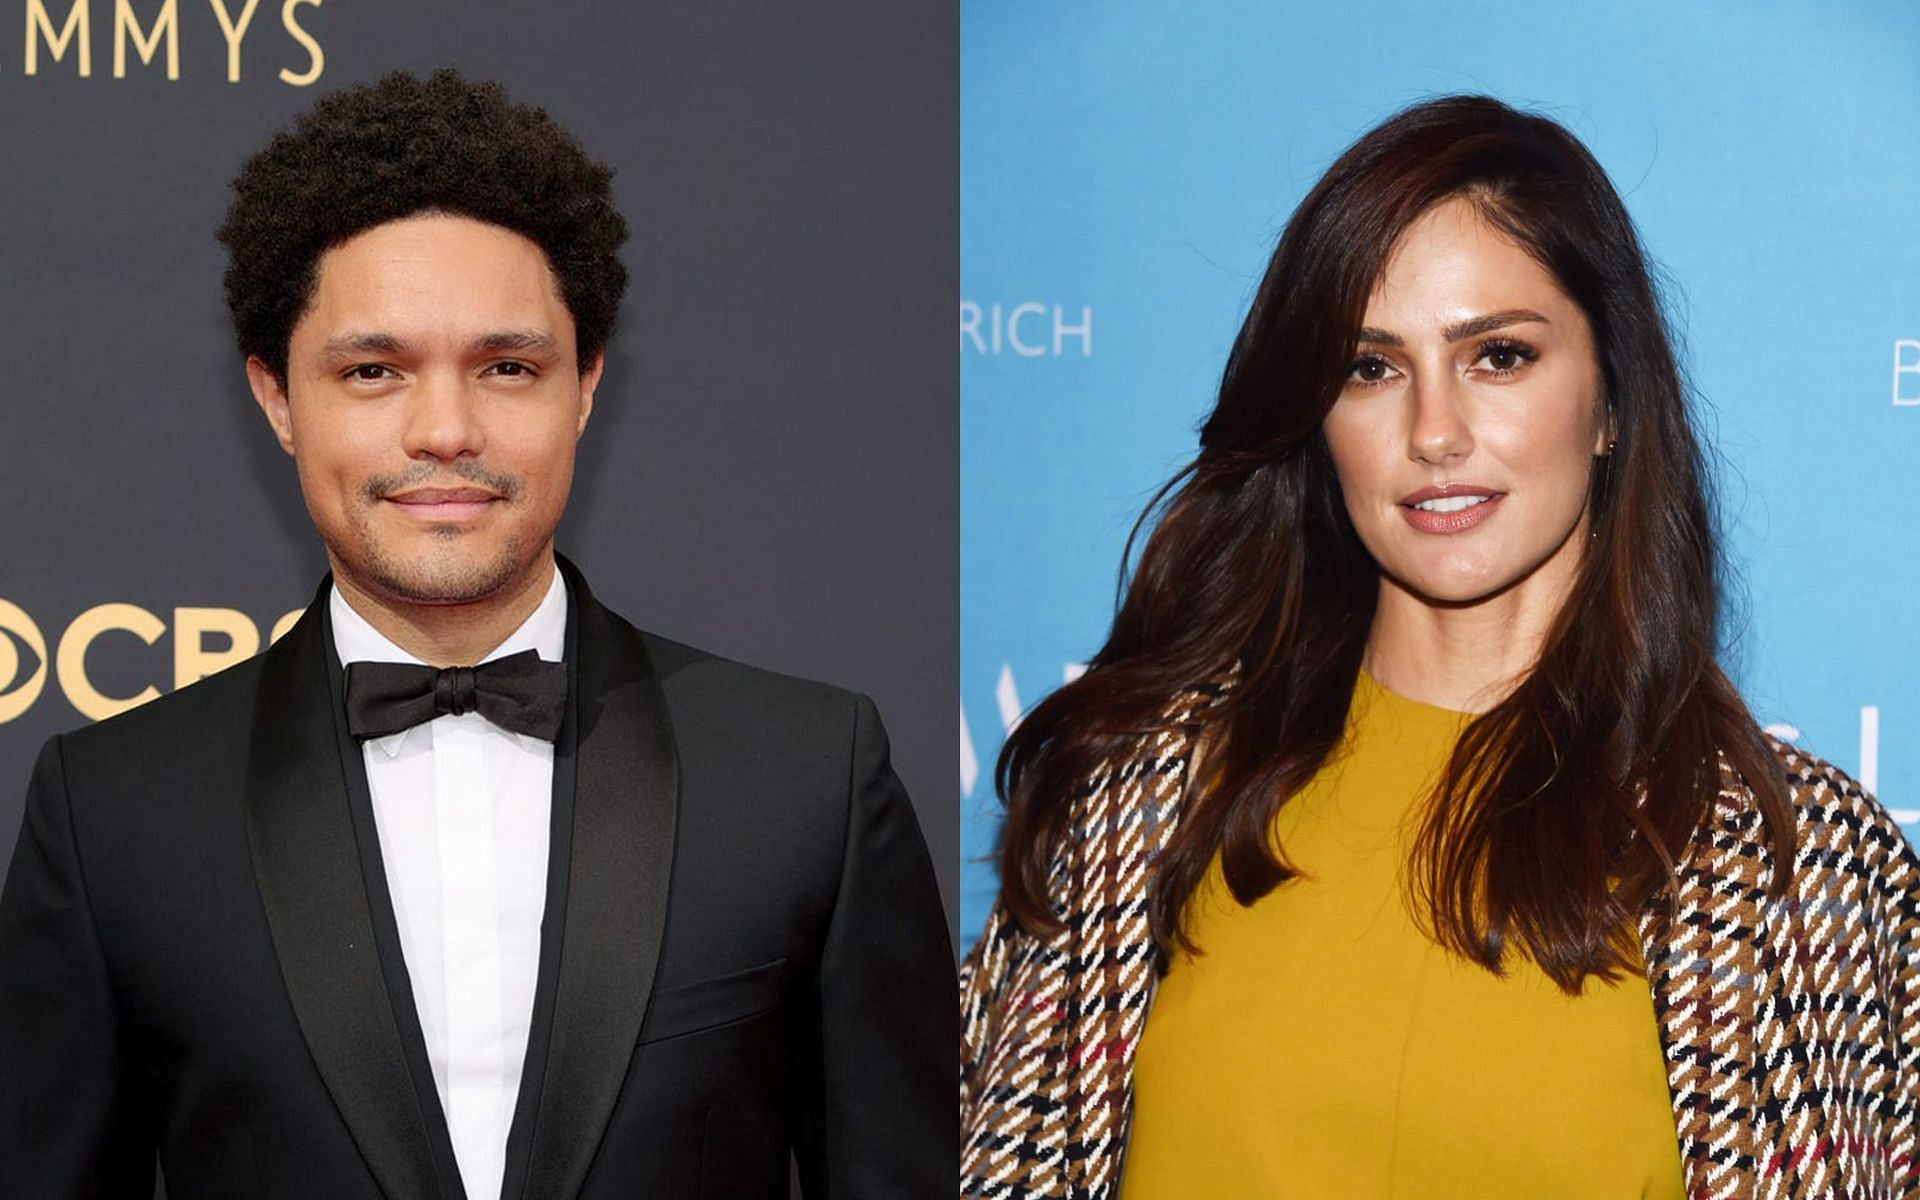 Minka Kelly and Trevor Noah were first linked in August 2020 (Image via Getty Images/ Presley Ann/ Rich Fury)